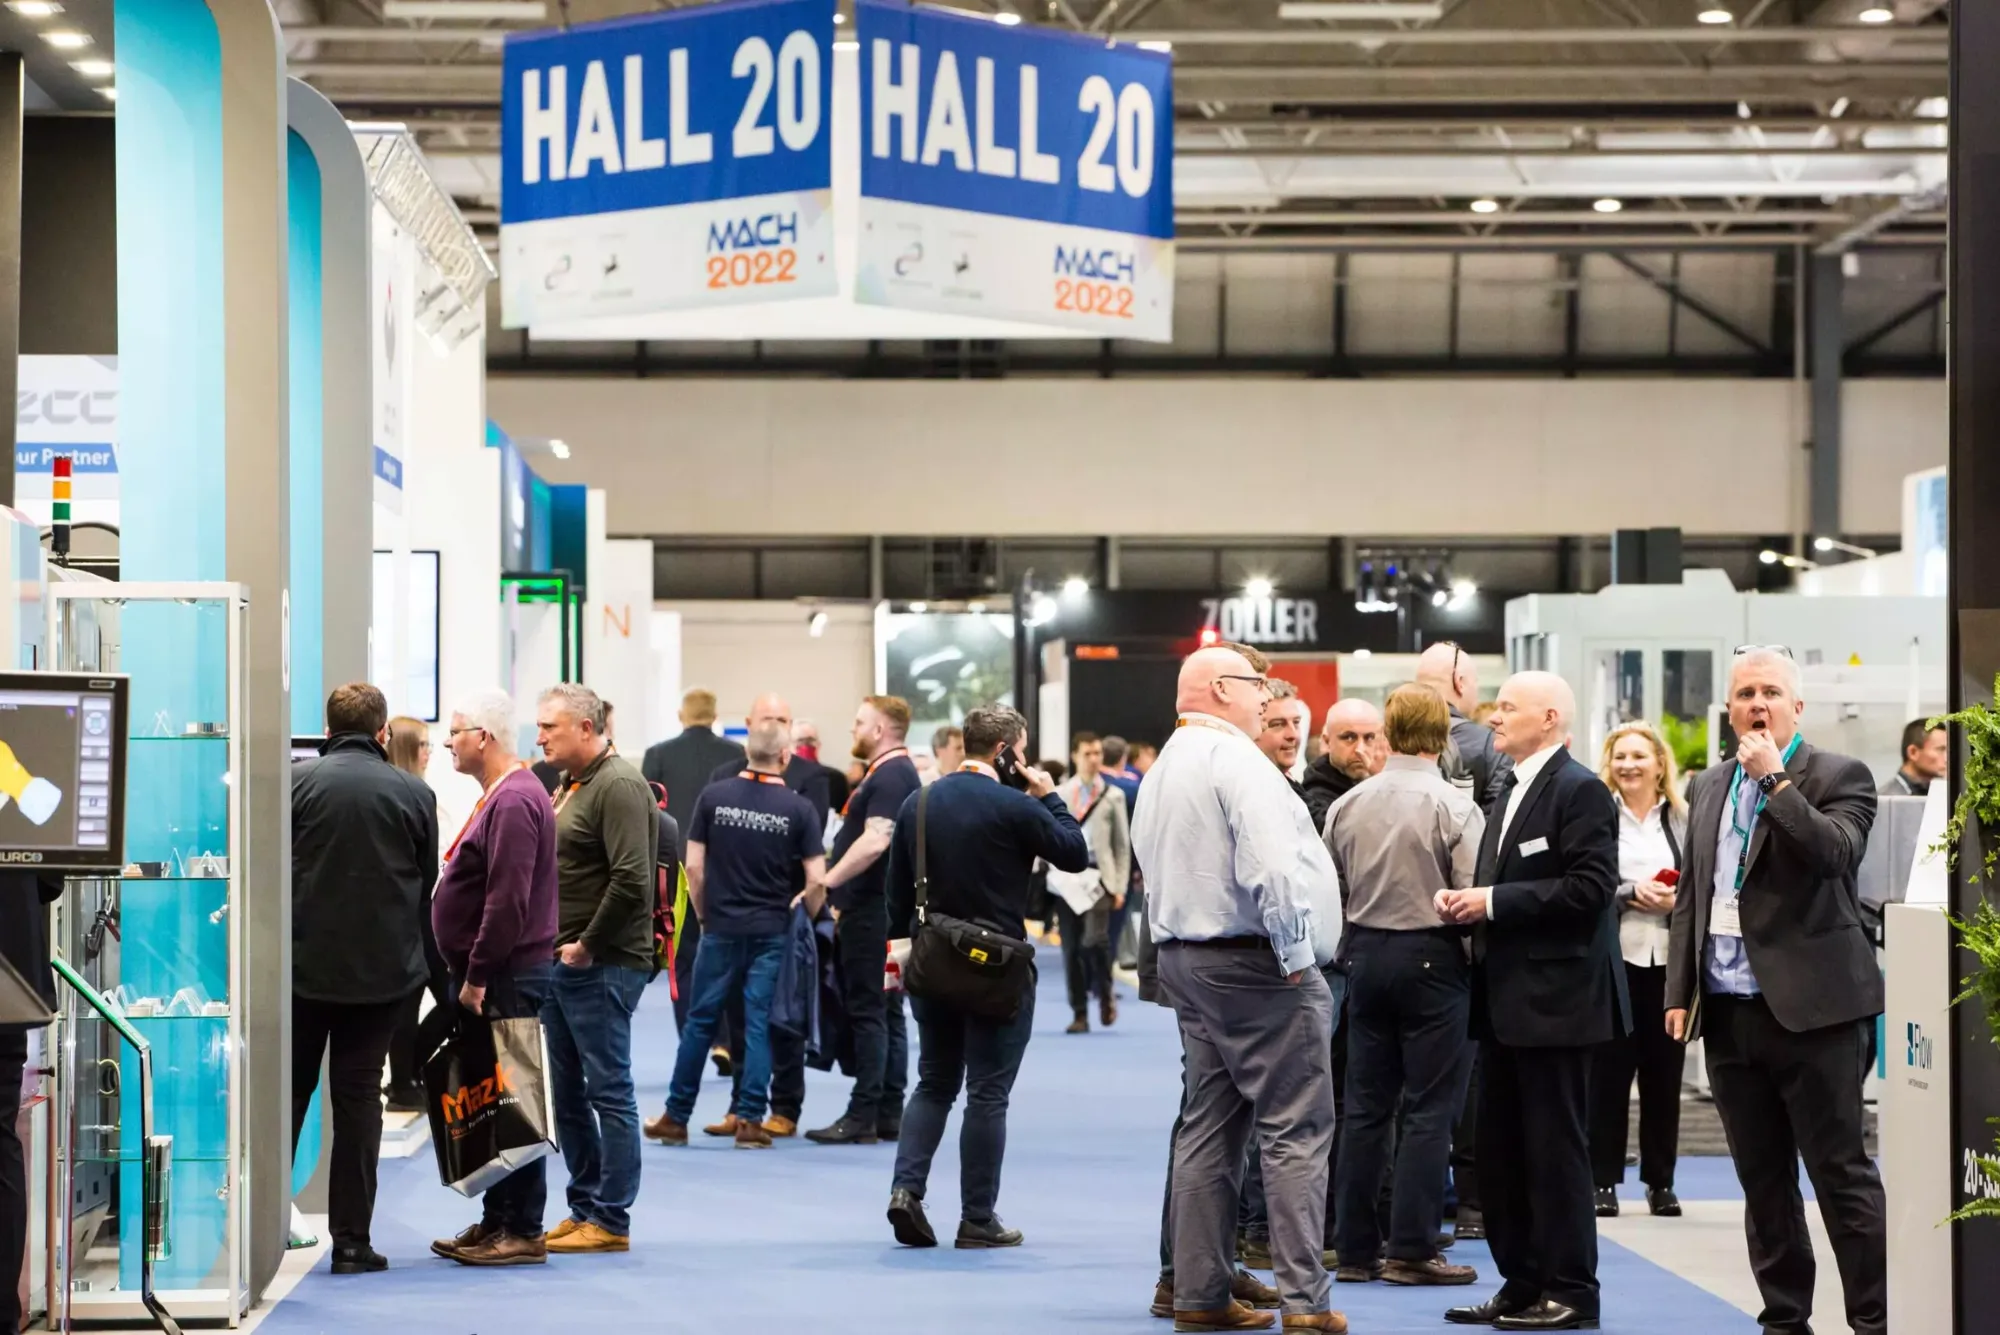 Mach 2024 Exhibition Unveiling Innovations in Manufacturing